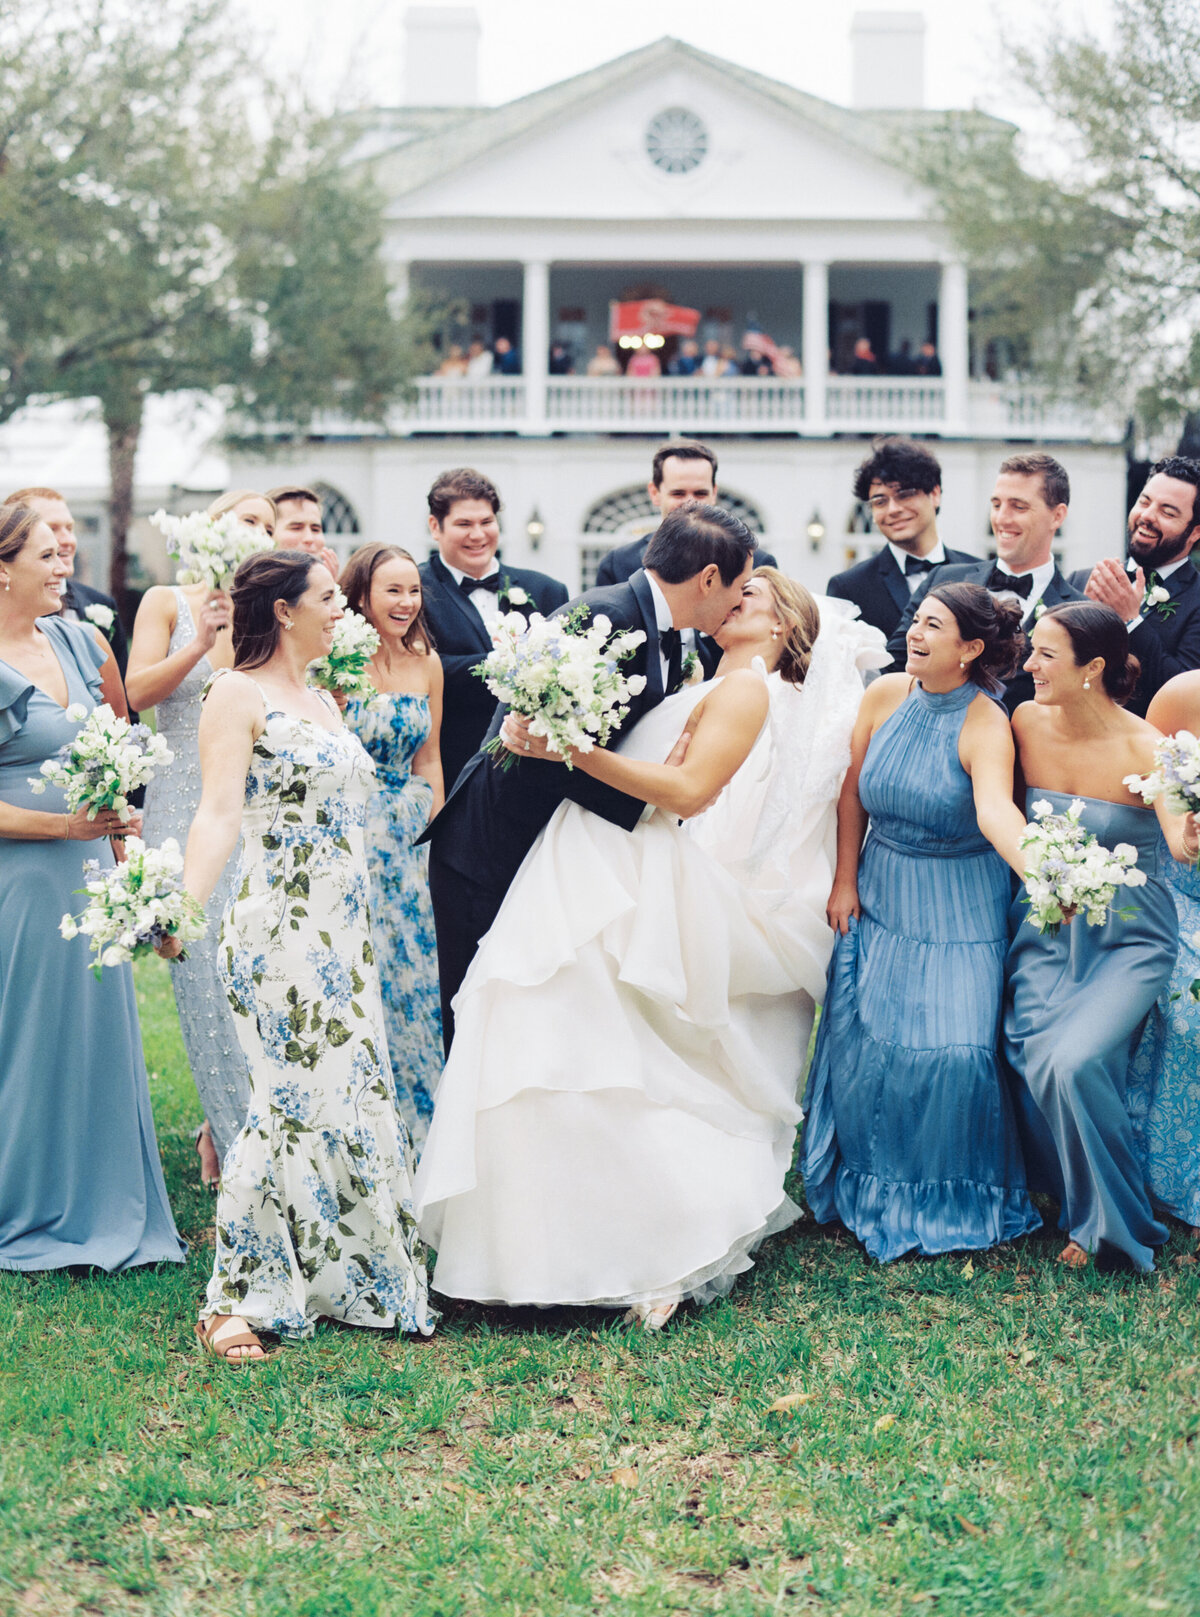 Full wedding party celebrates bride and groom kissing on the front lawn at Lowndes Grove. Bridesmaids in mix-matched blue dresses. Destination wedding photographer.